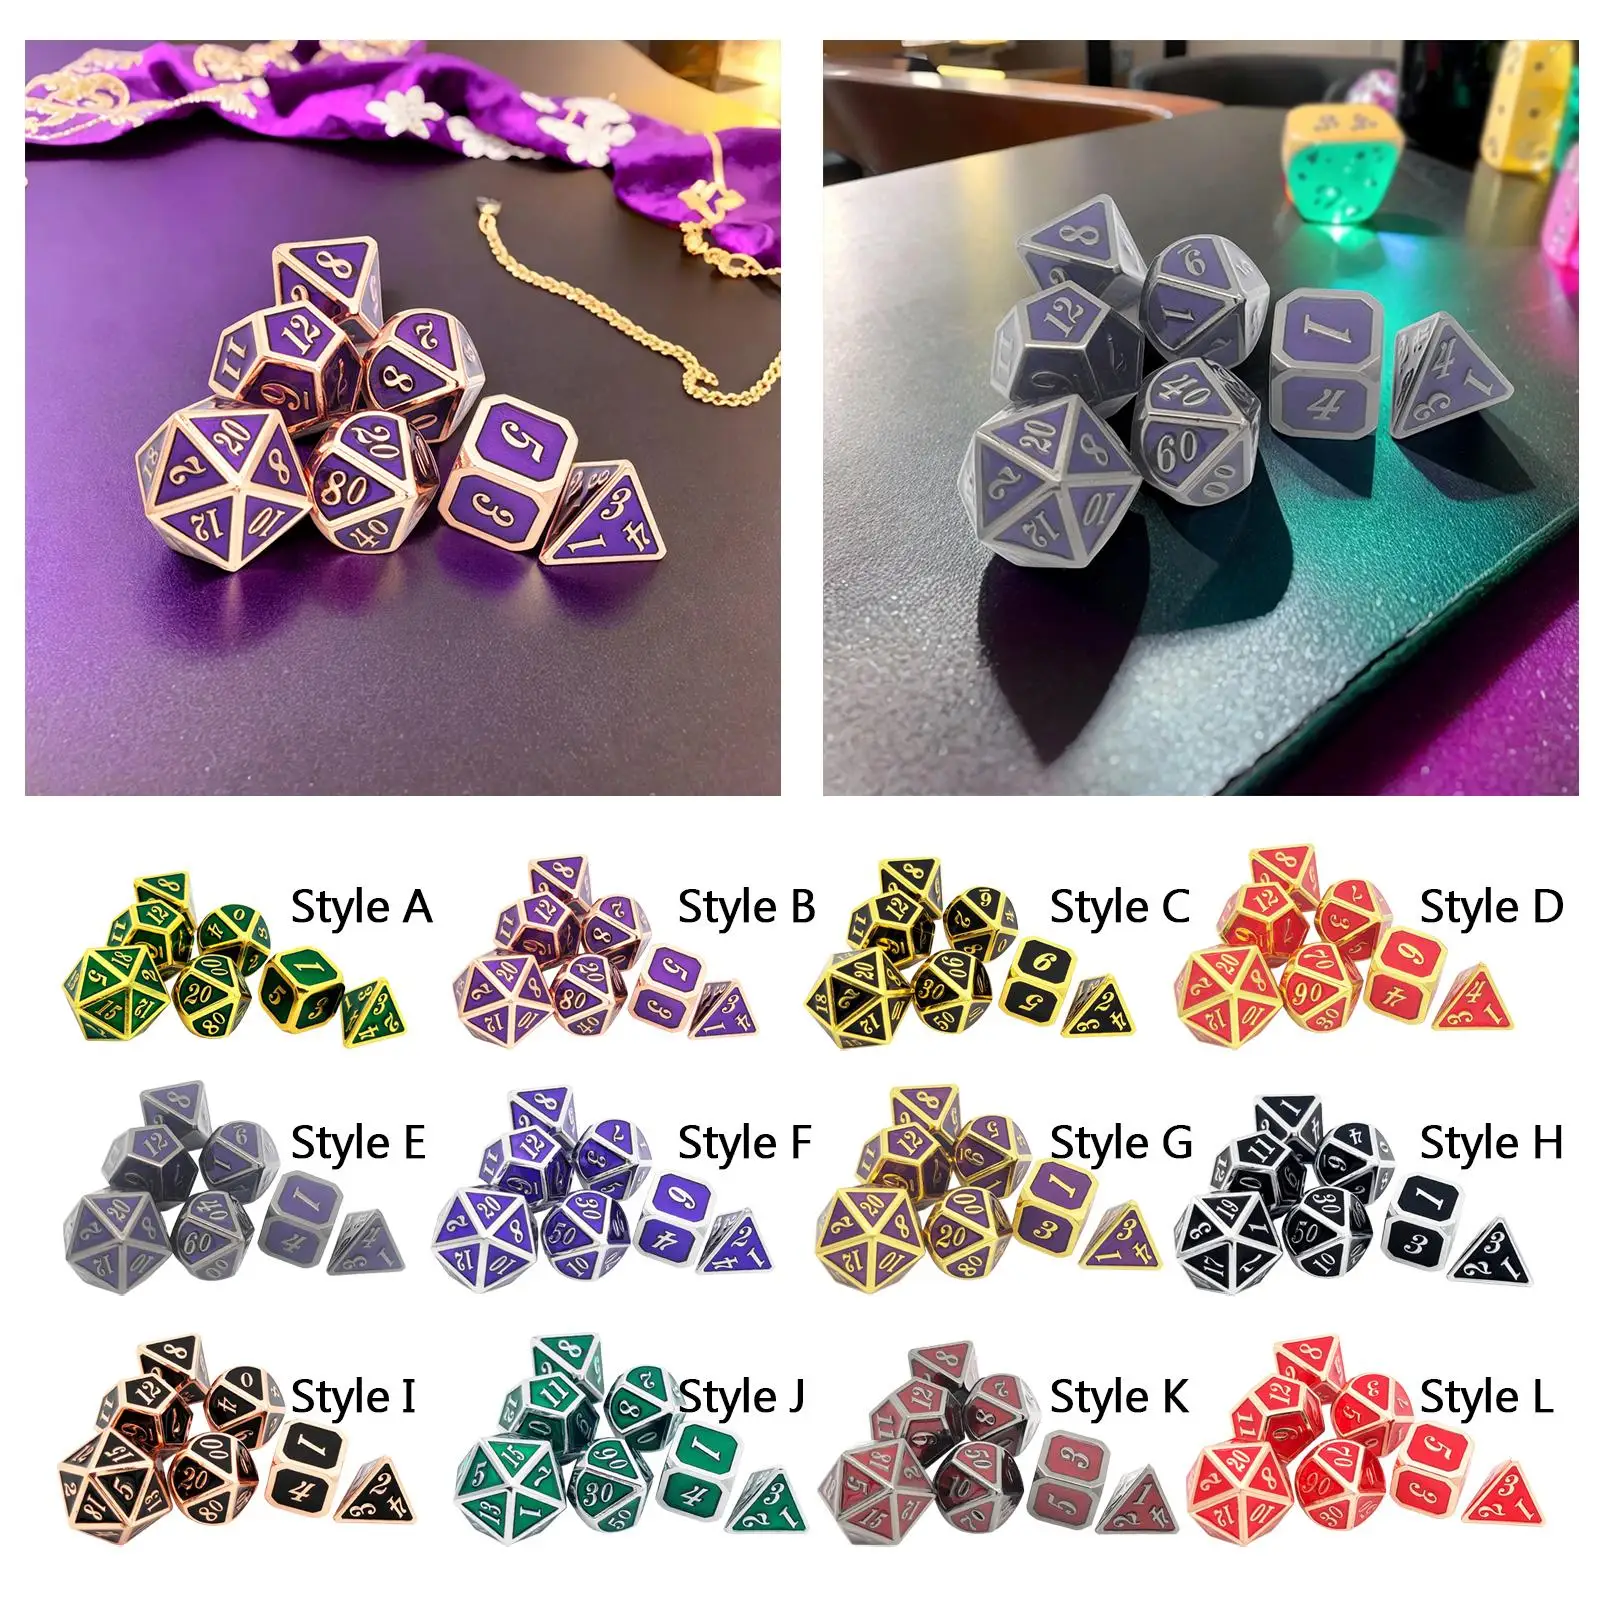 Metal Polyhedral Dice 7Pcs Set Handmade Versatile Reusable Smooth Surface Aluminum Alloy Accessory for Interactive Games 